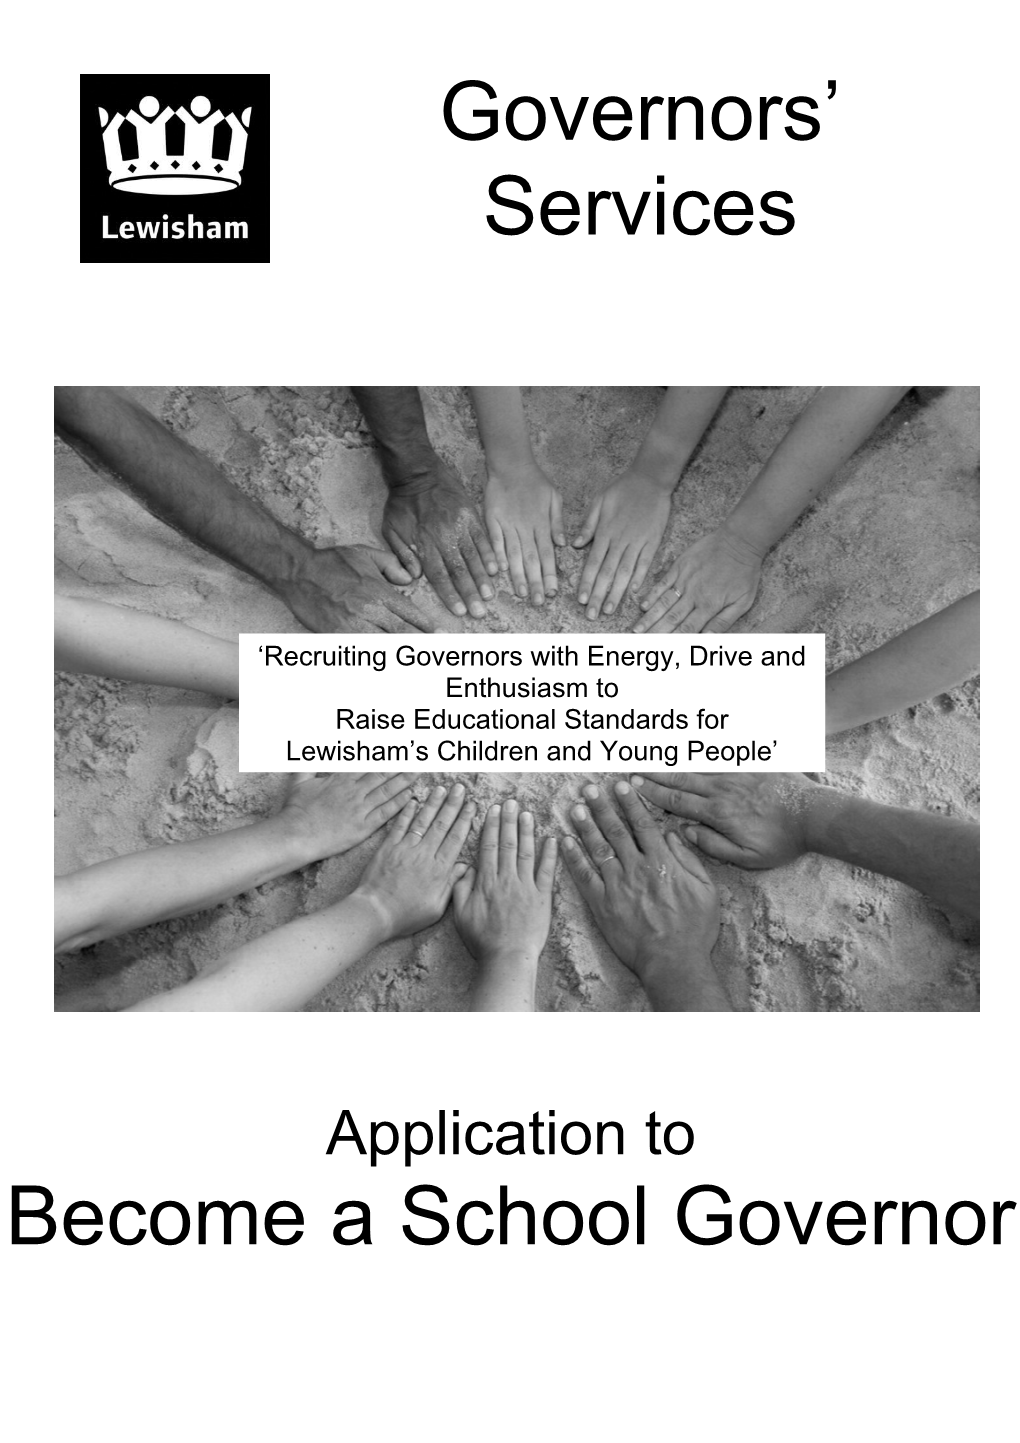 Application for Prospective School Governors